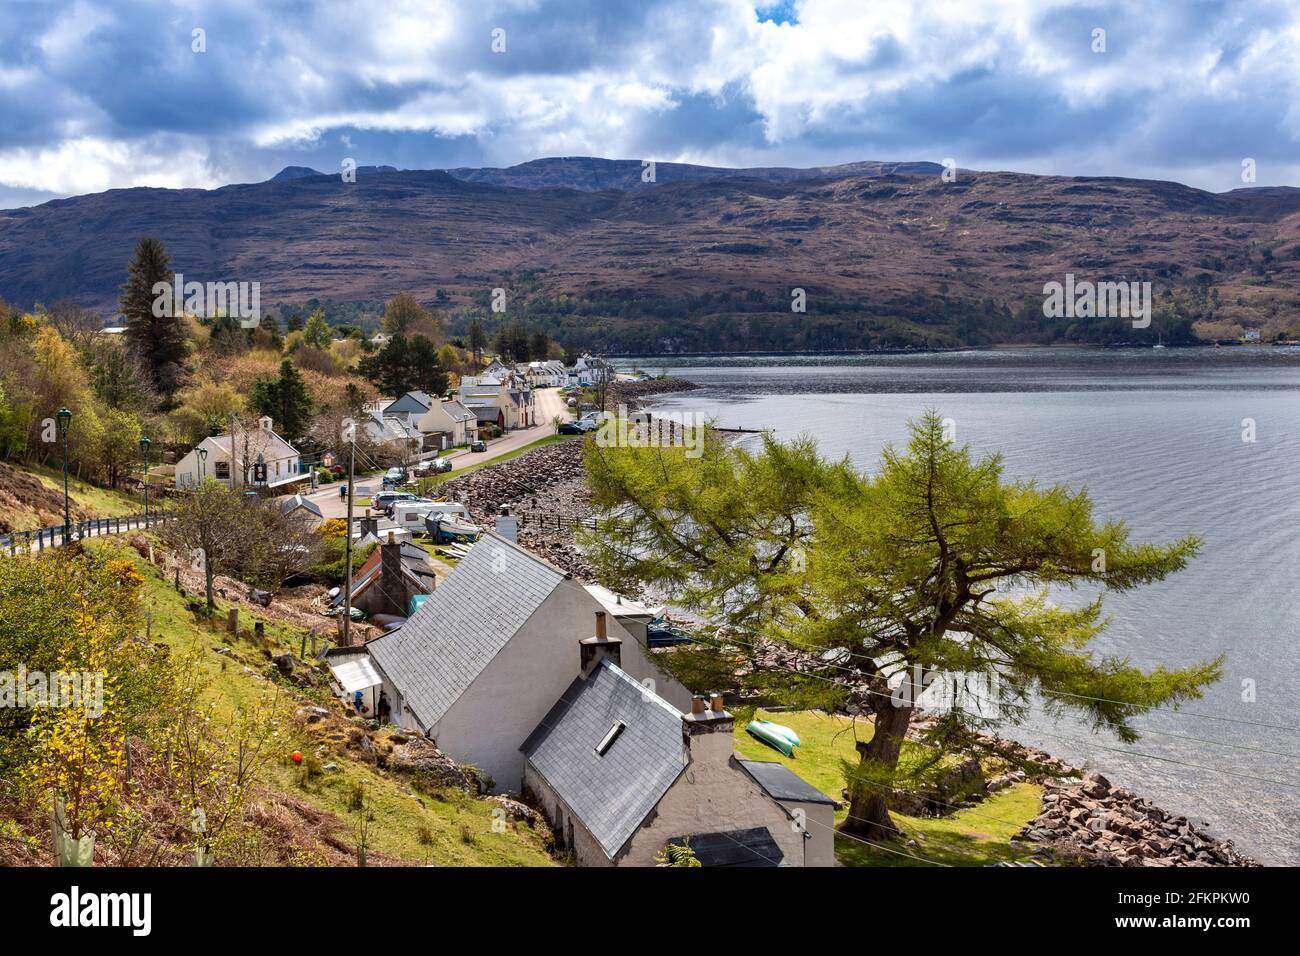 SHIELDAIG WESTER ROSS HIGHLANDS SCOTLAND THE VILLAGE HOUSES ON THE SHORE OF LOCH SHIELDAIG Stock Photo